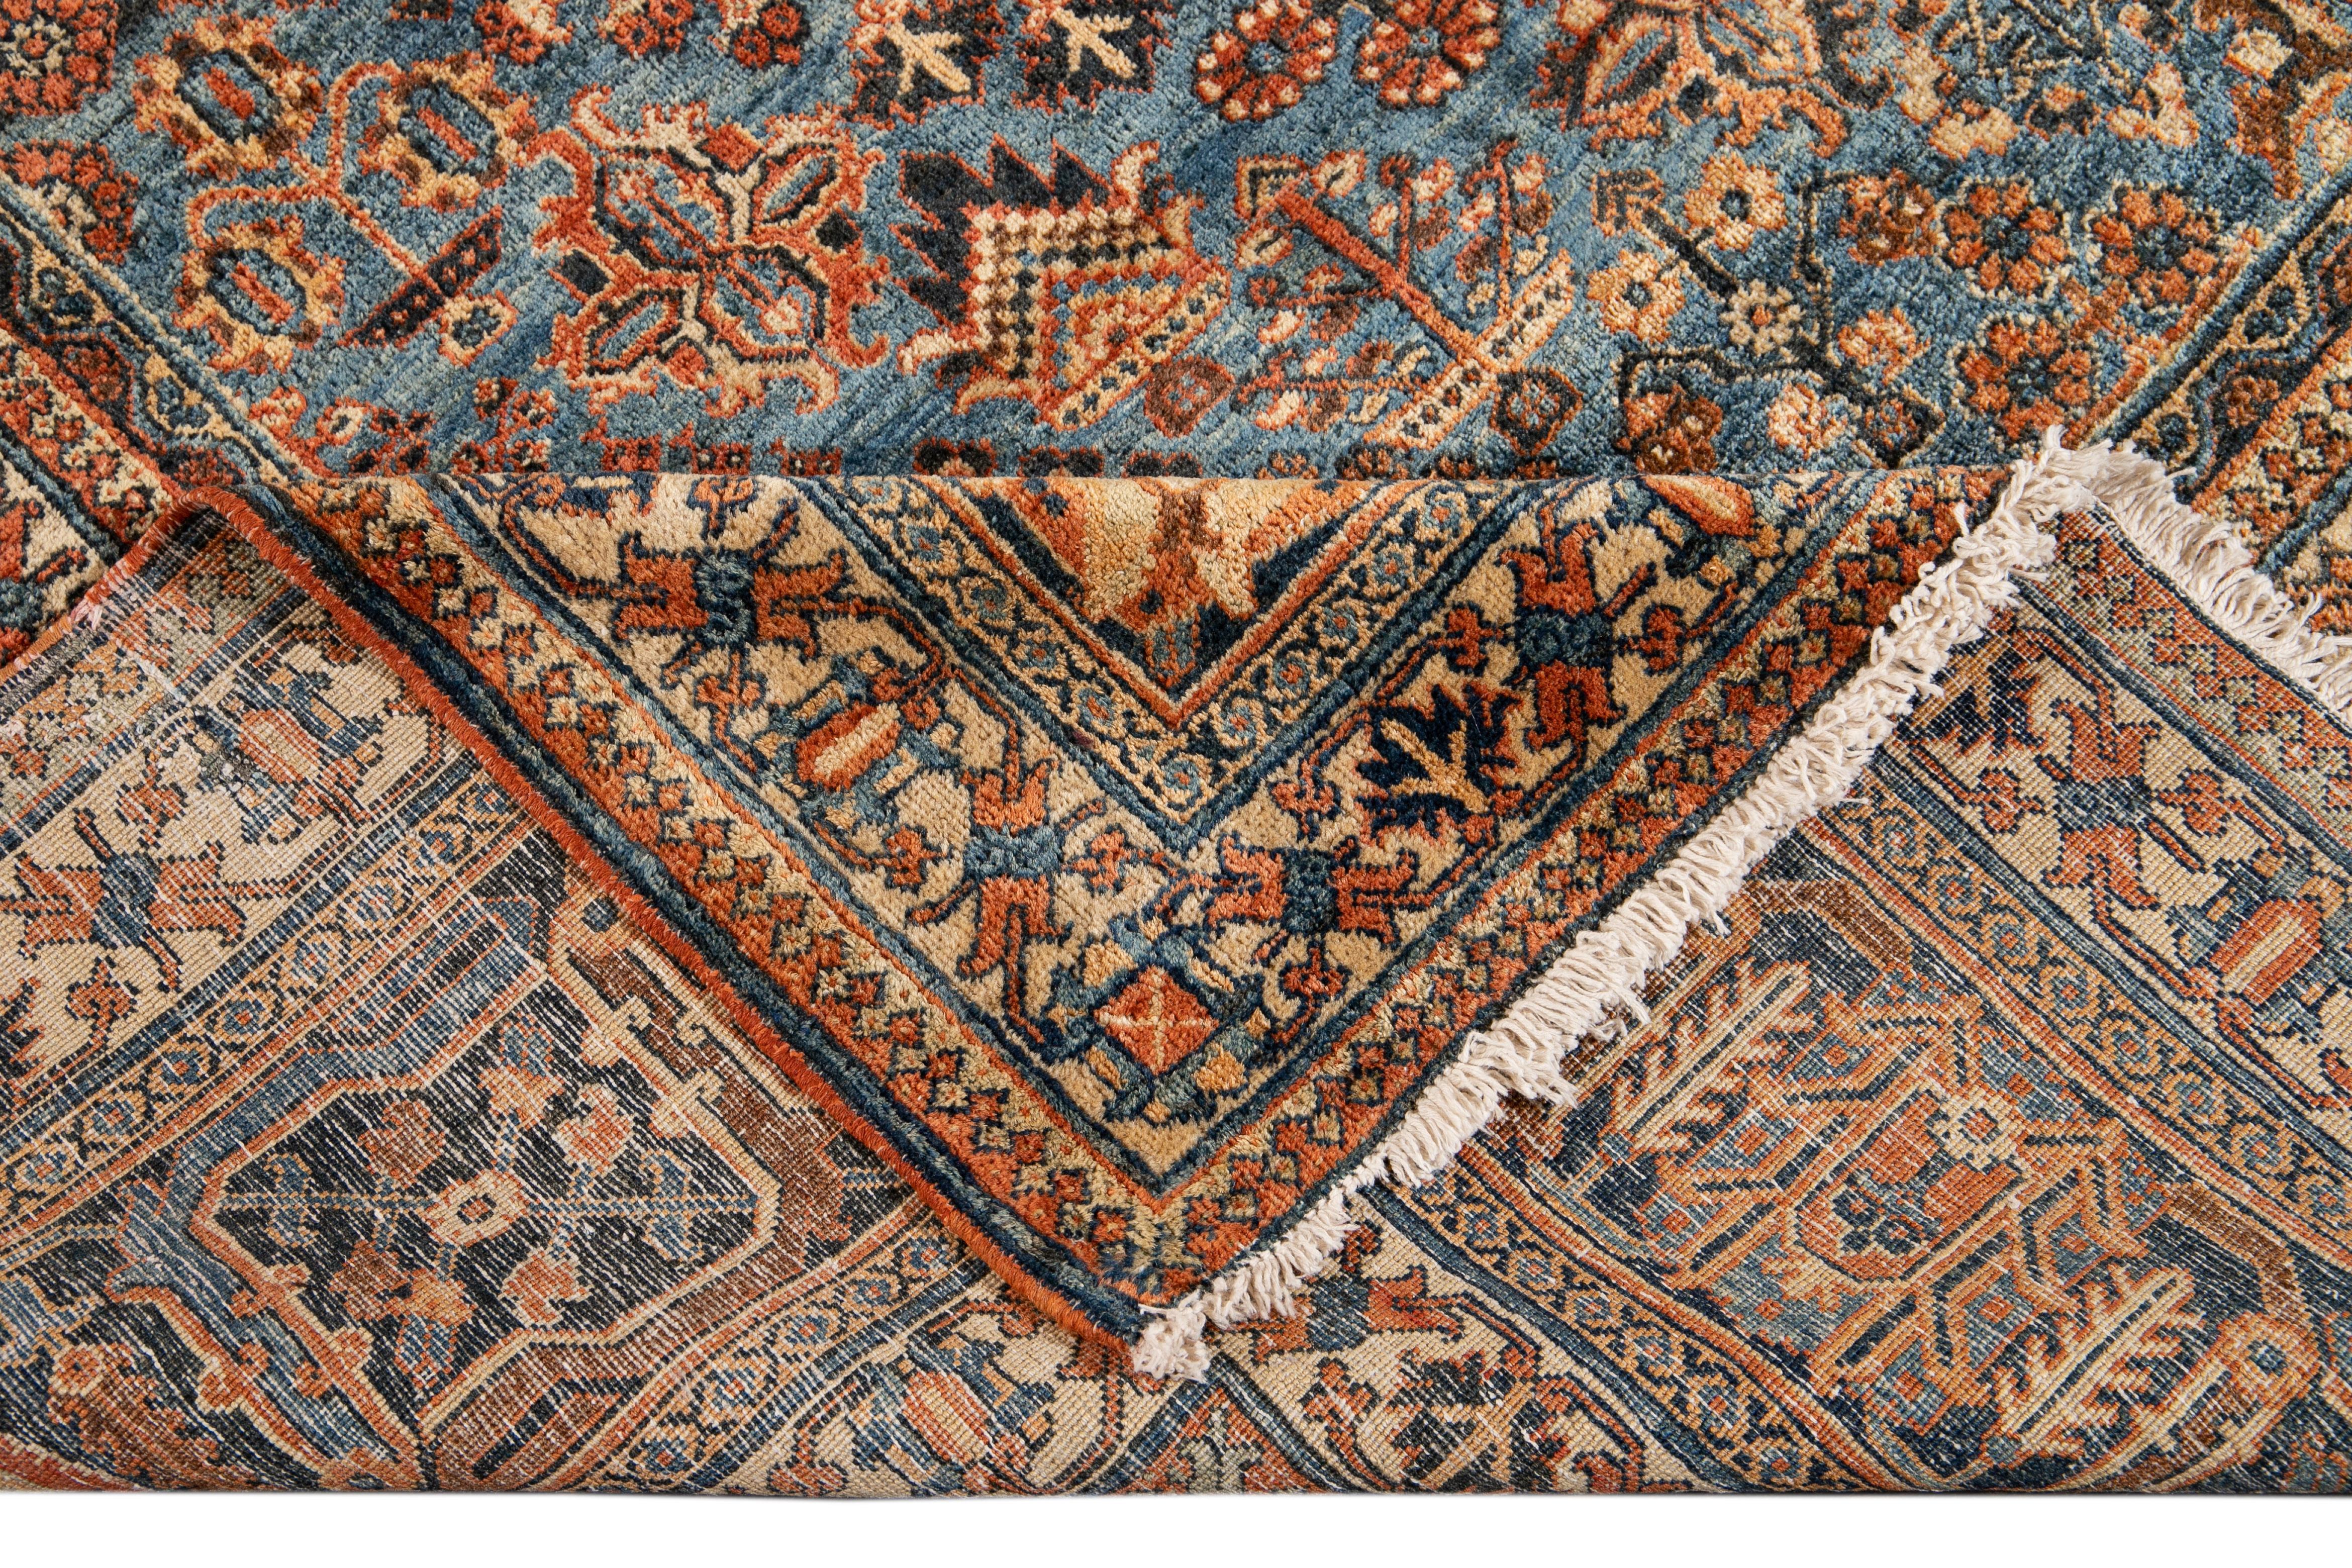 Beautiful antique Josheghan hand-knotted wool rug with an orange-rust field. This Persian rug has multi-color accents in a gorgeous all-over medallion floral design.

This rug measures: 13'7